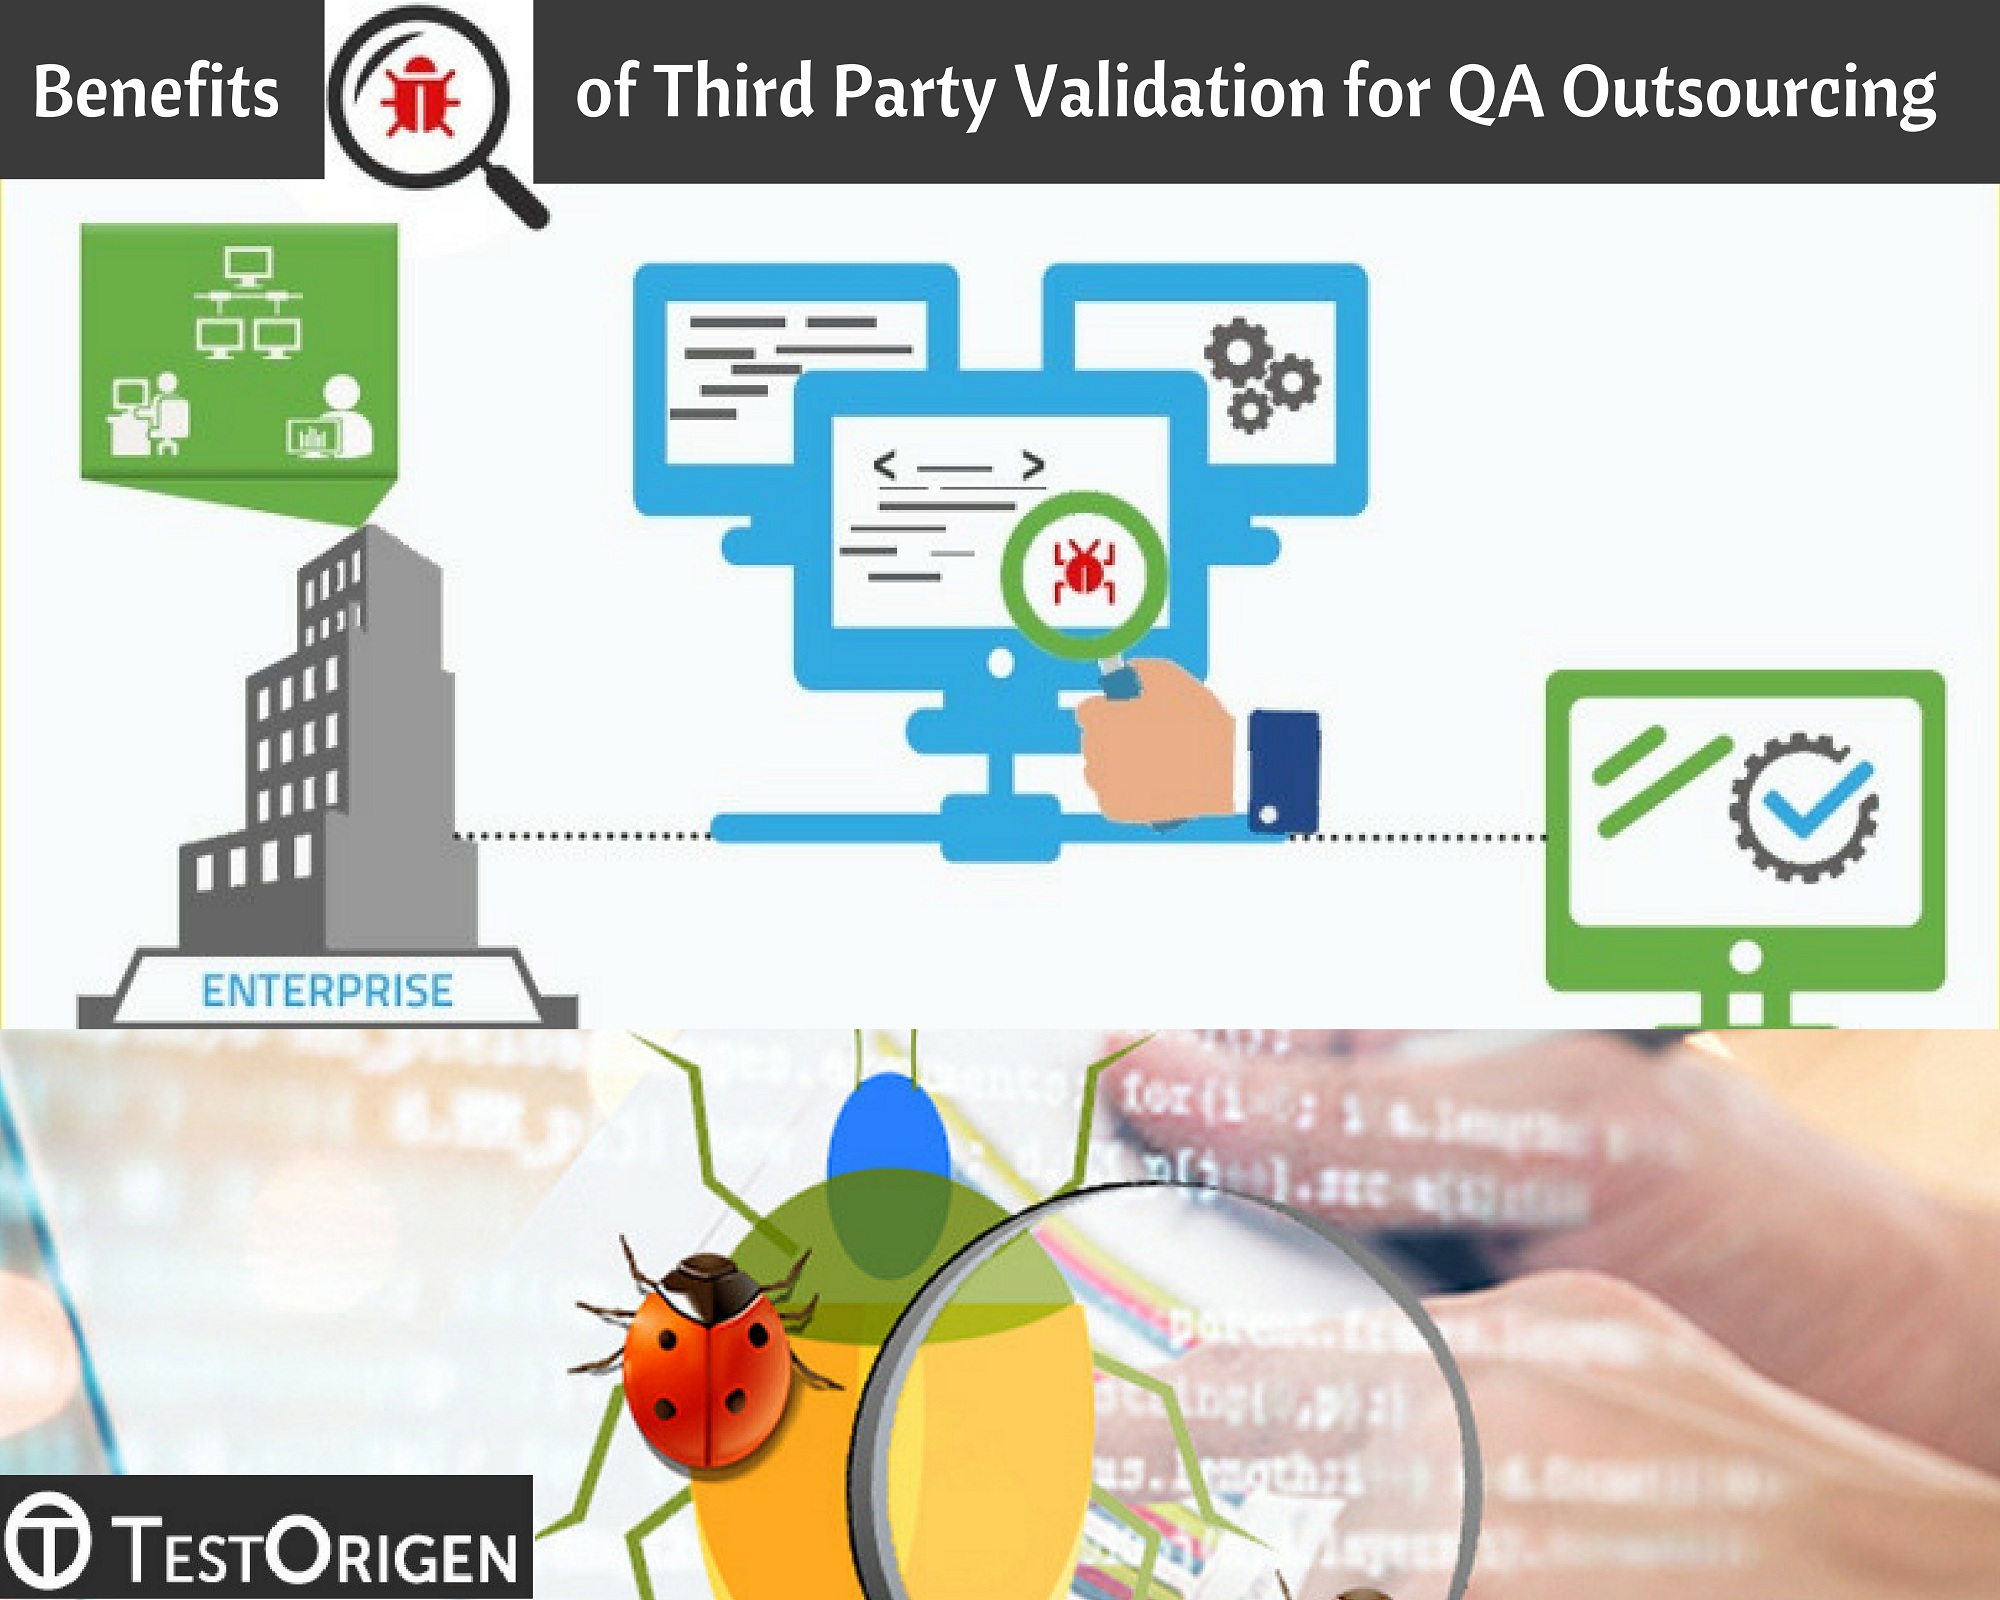 Benefits of Third Party Validation for QA Outsourcing